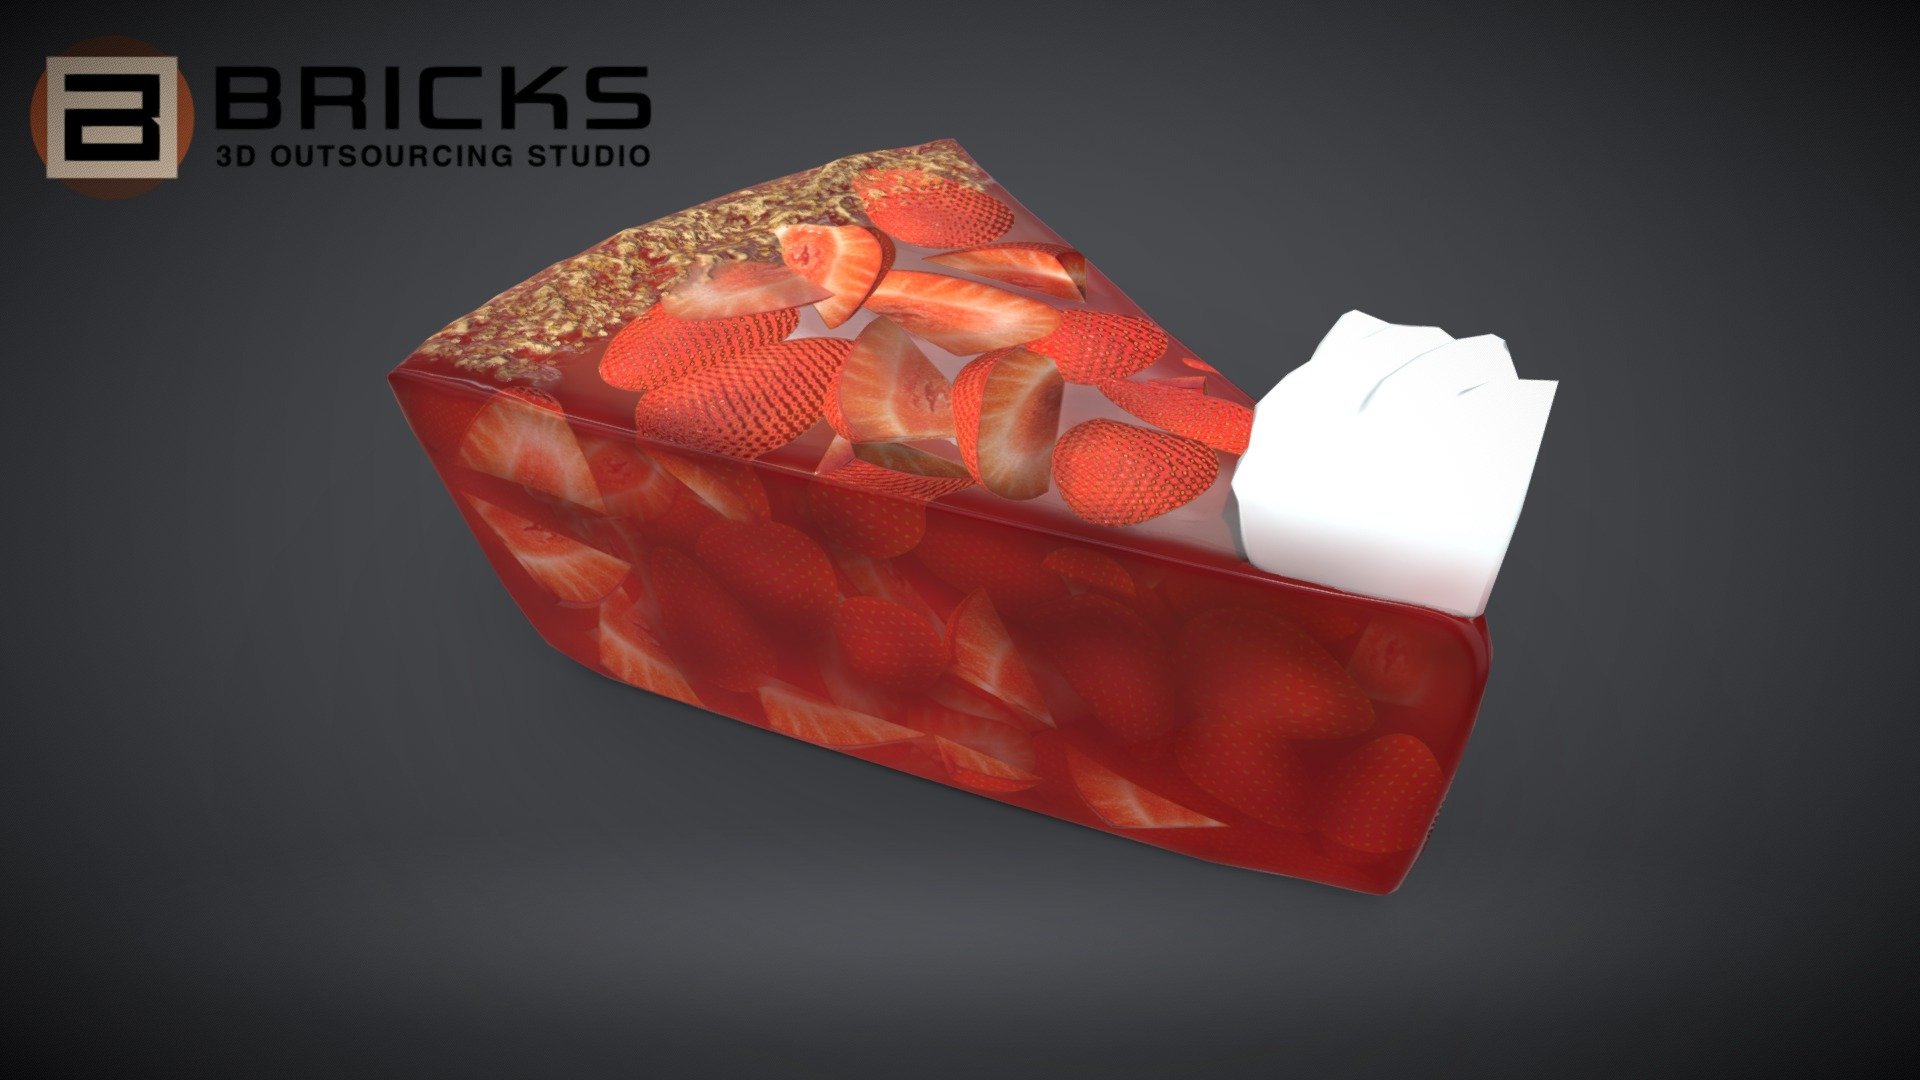 PBR Food Asset:
PieStrawberry_Piece
Polycount: 912
Vertex count: 458
Texture Size: 2048px x 2048px
Normal: OpenGL

If you need any adjust in file please contact us: team@bricks3dstudio.com

Hire us: tringuyen@bricks3dstudio.com
Here is us: https://www.bricks3dstudio.com/
        https://www.artstation.com/bricksstudio
        https://www.facebook.com/Bricks3dstudio/
        https://www.linkedin.com/in/bricks-studio-b10462252/ - PieStrawberryPiece - Buy Royalty Free 3D model by Bricks Studio (@bricks3dstudio) 3d model